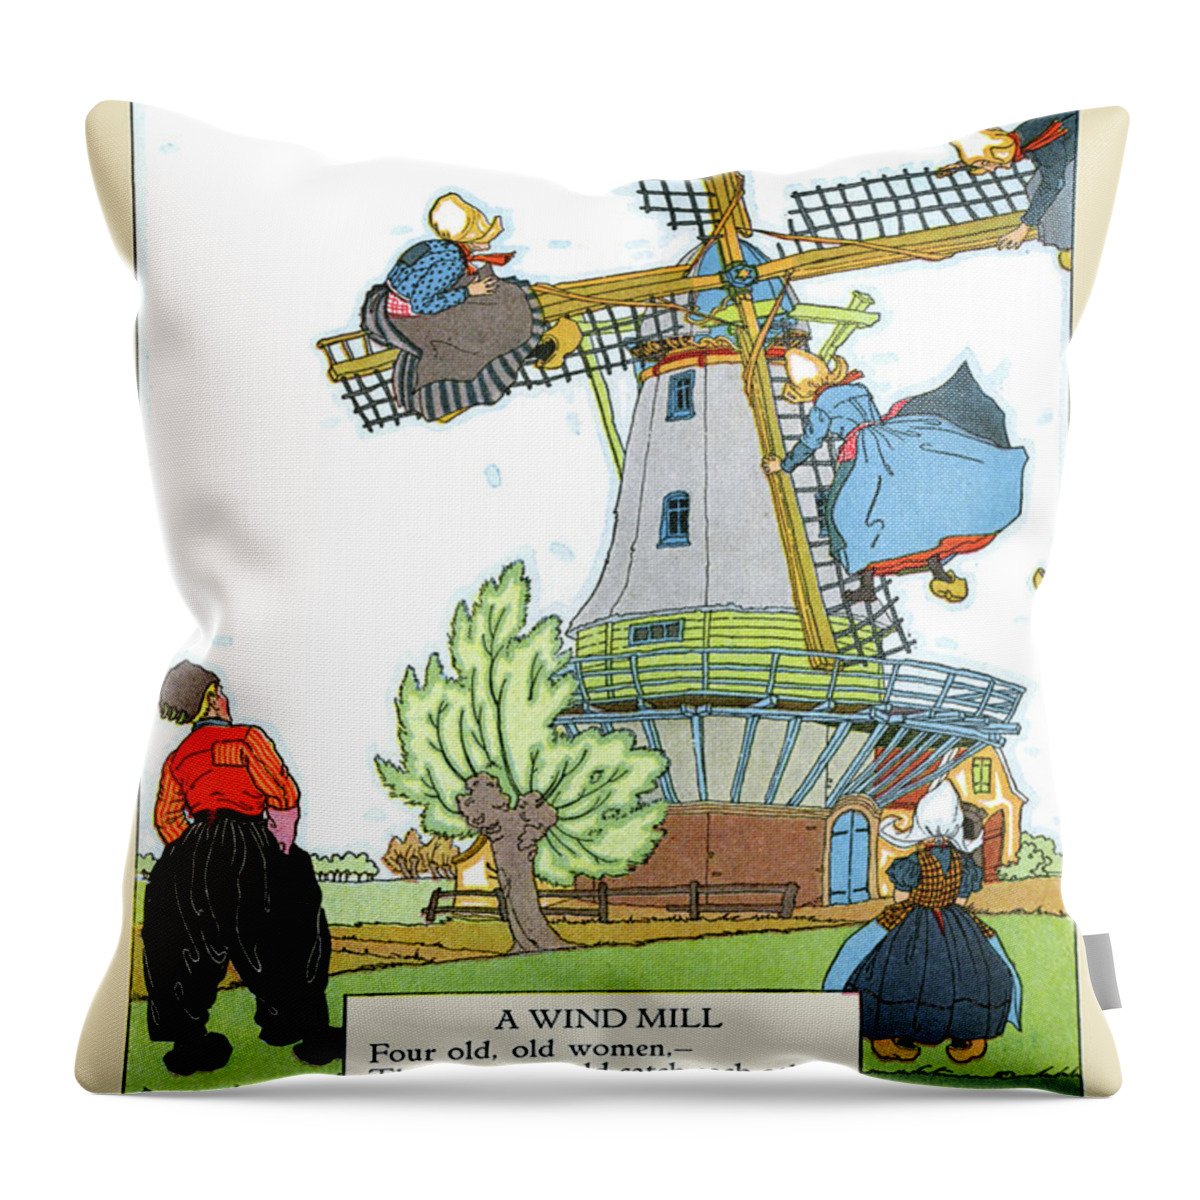 Windmill Throw Pillow featuring the painting A Windmill by Maud & Miska Petersham